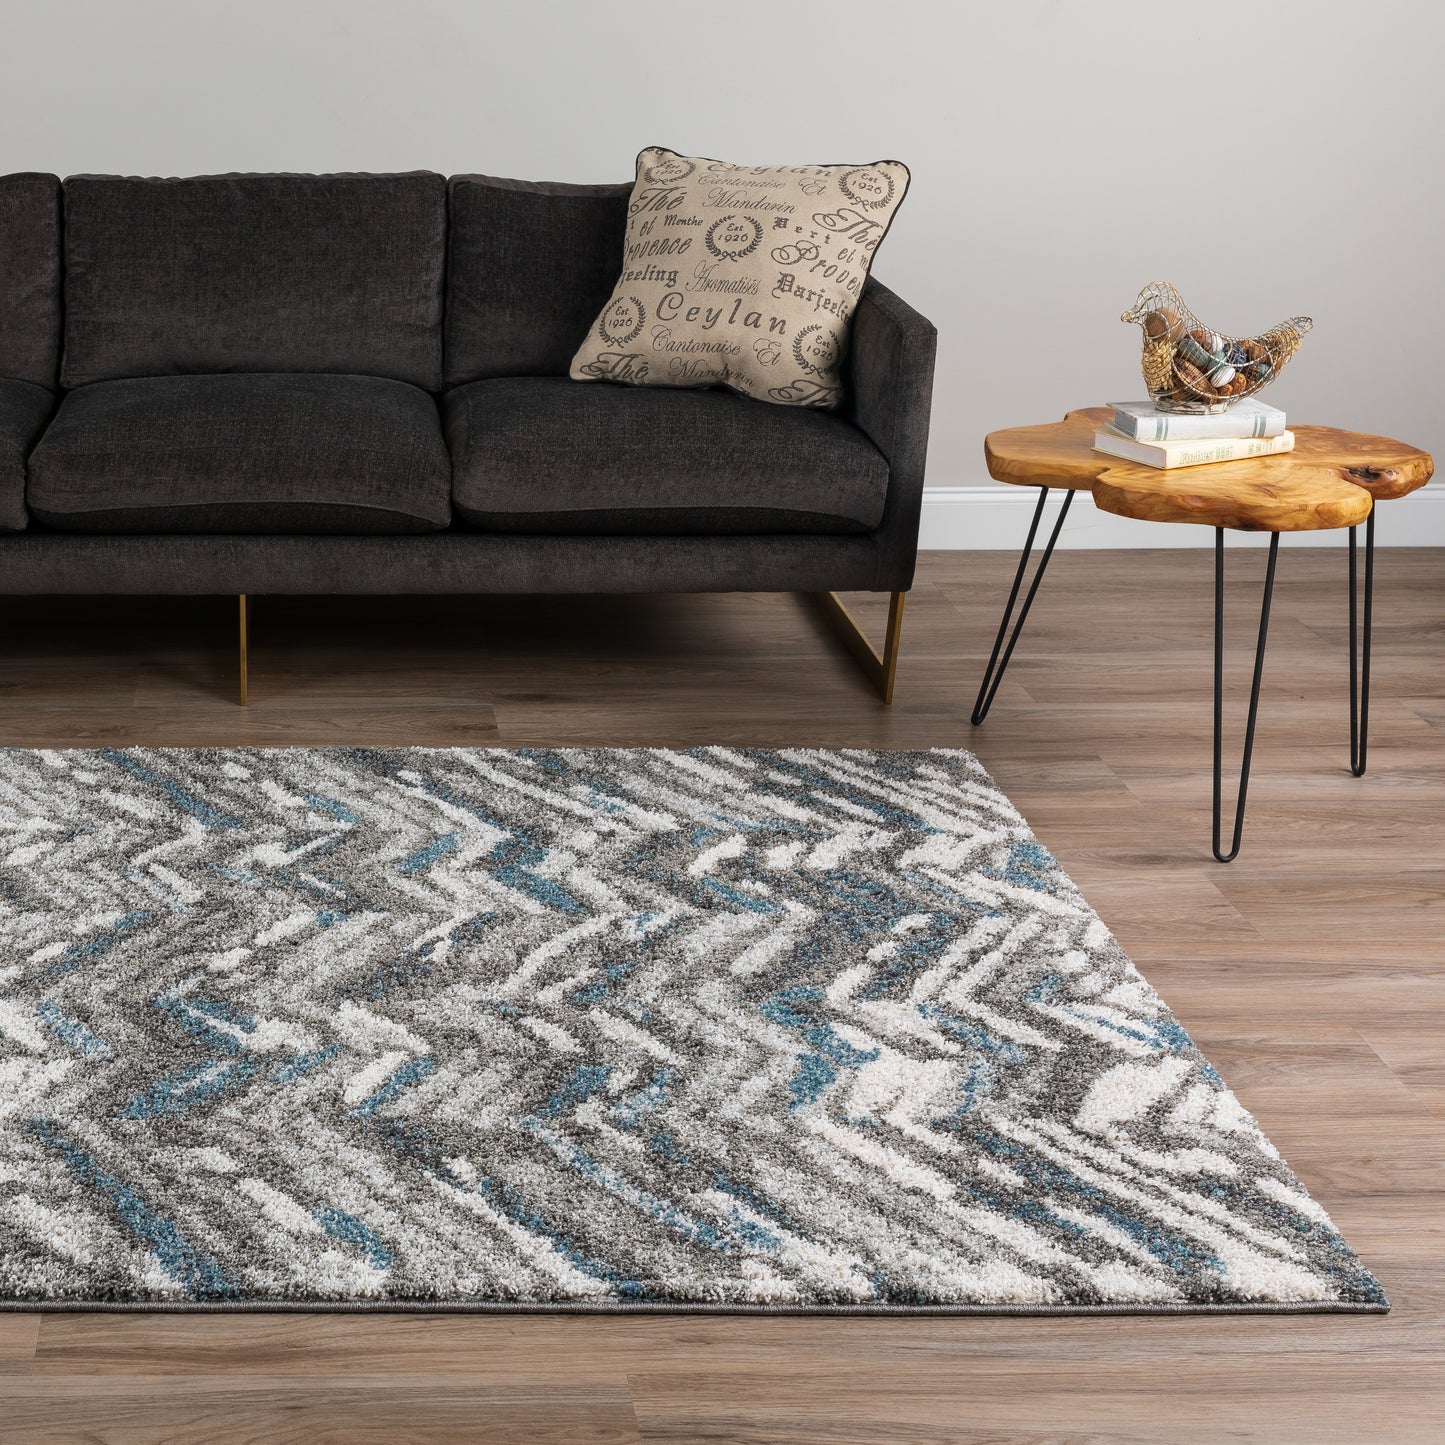 Rocco RC4 Machine Made Synthetic Blend Indoor Area Rug by Dalyn Rugs